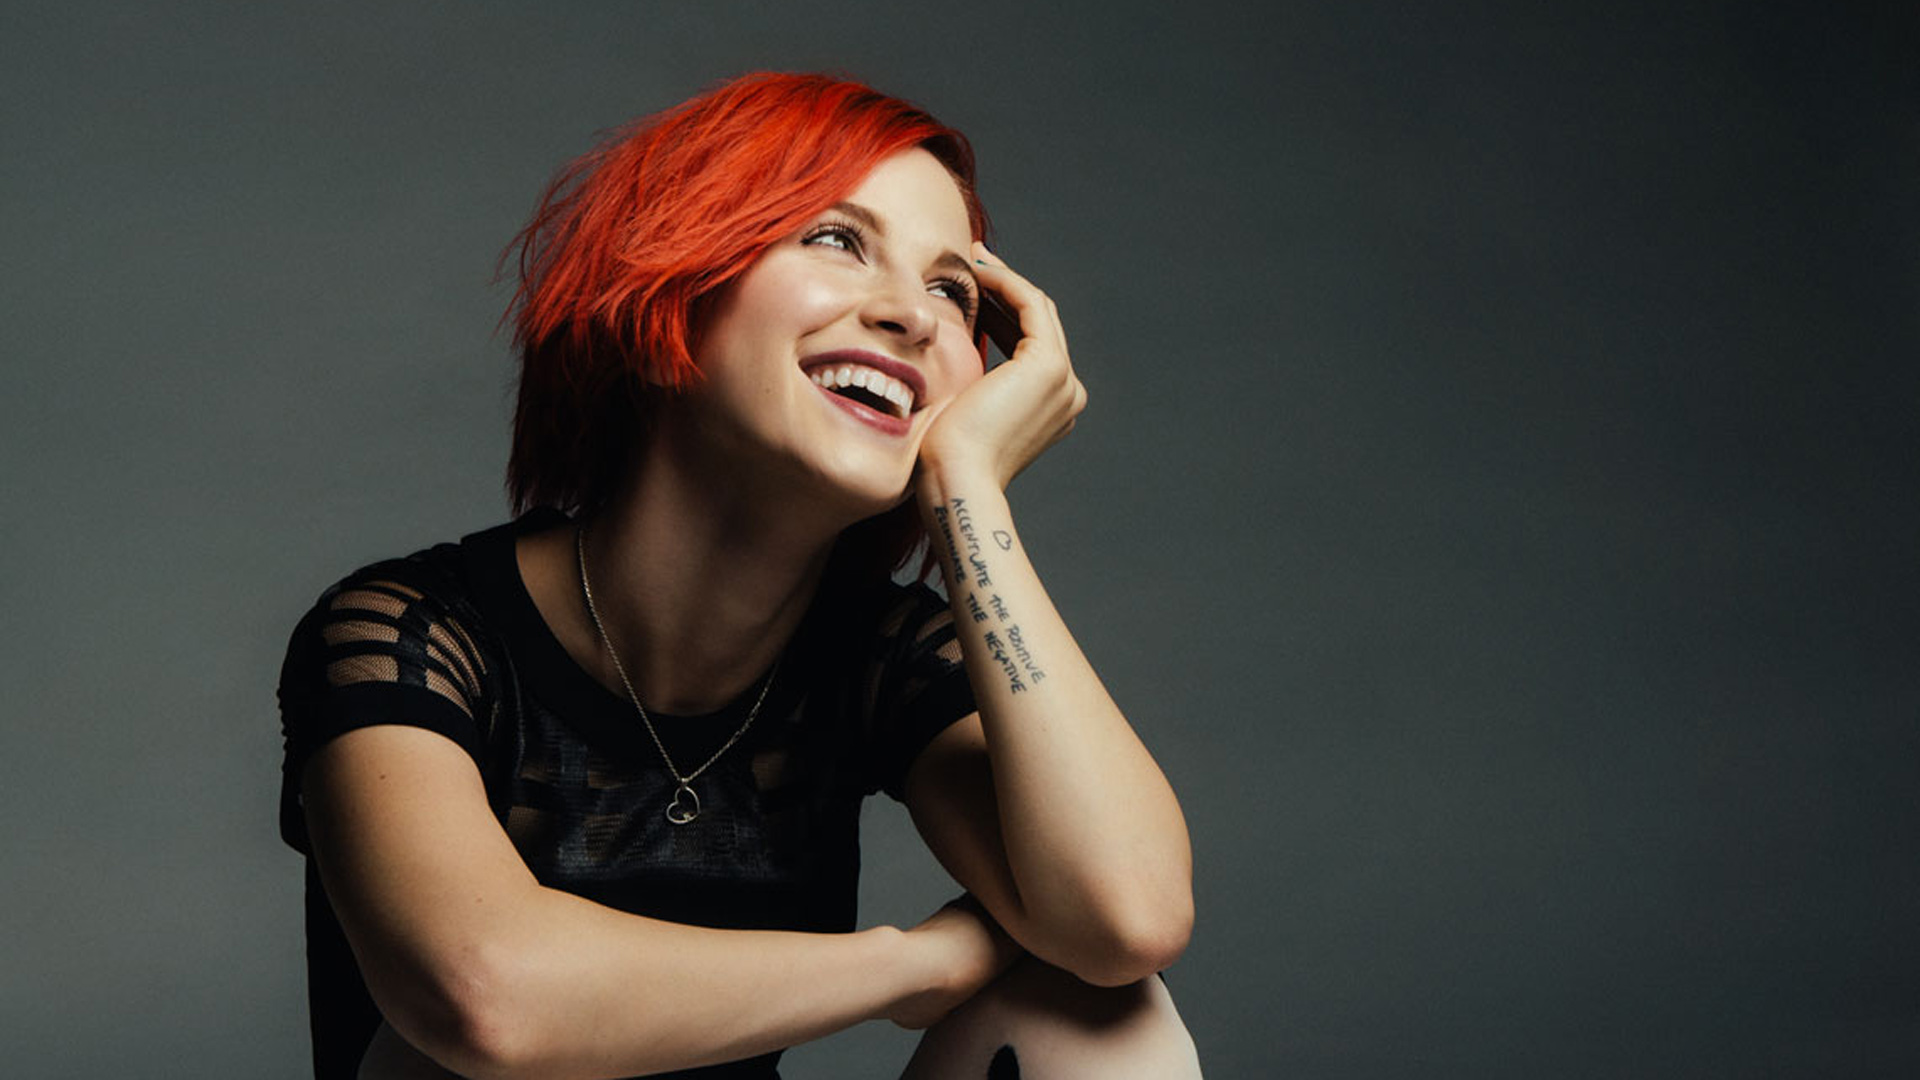 hayley williams wallpaper hd,hair,red hair,facial expression,red,chin